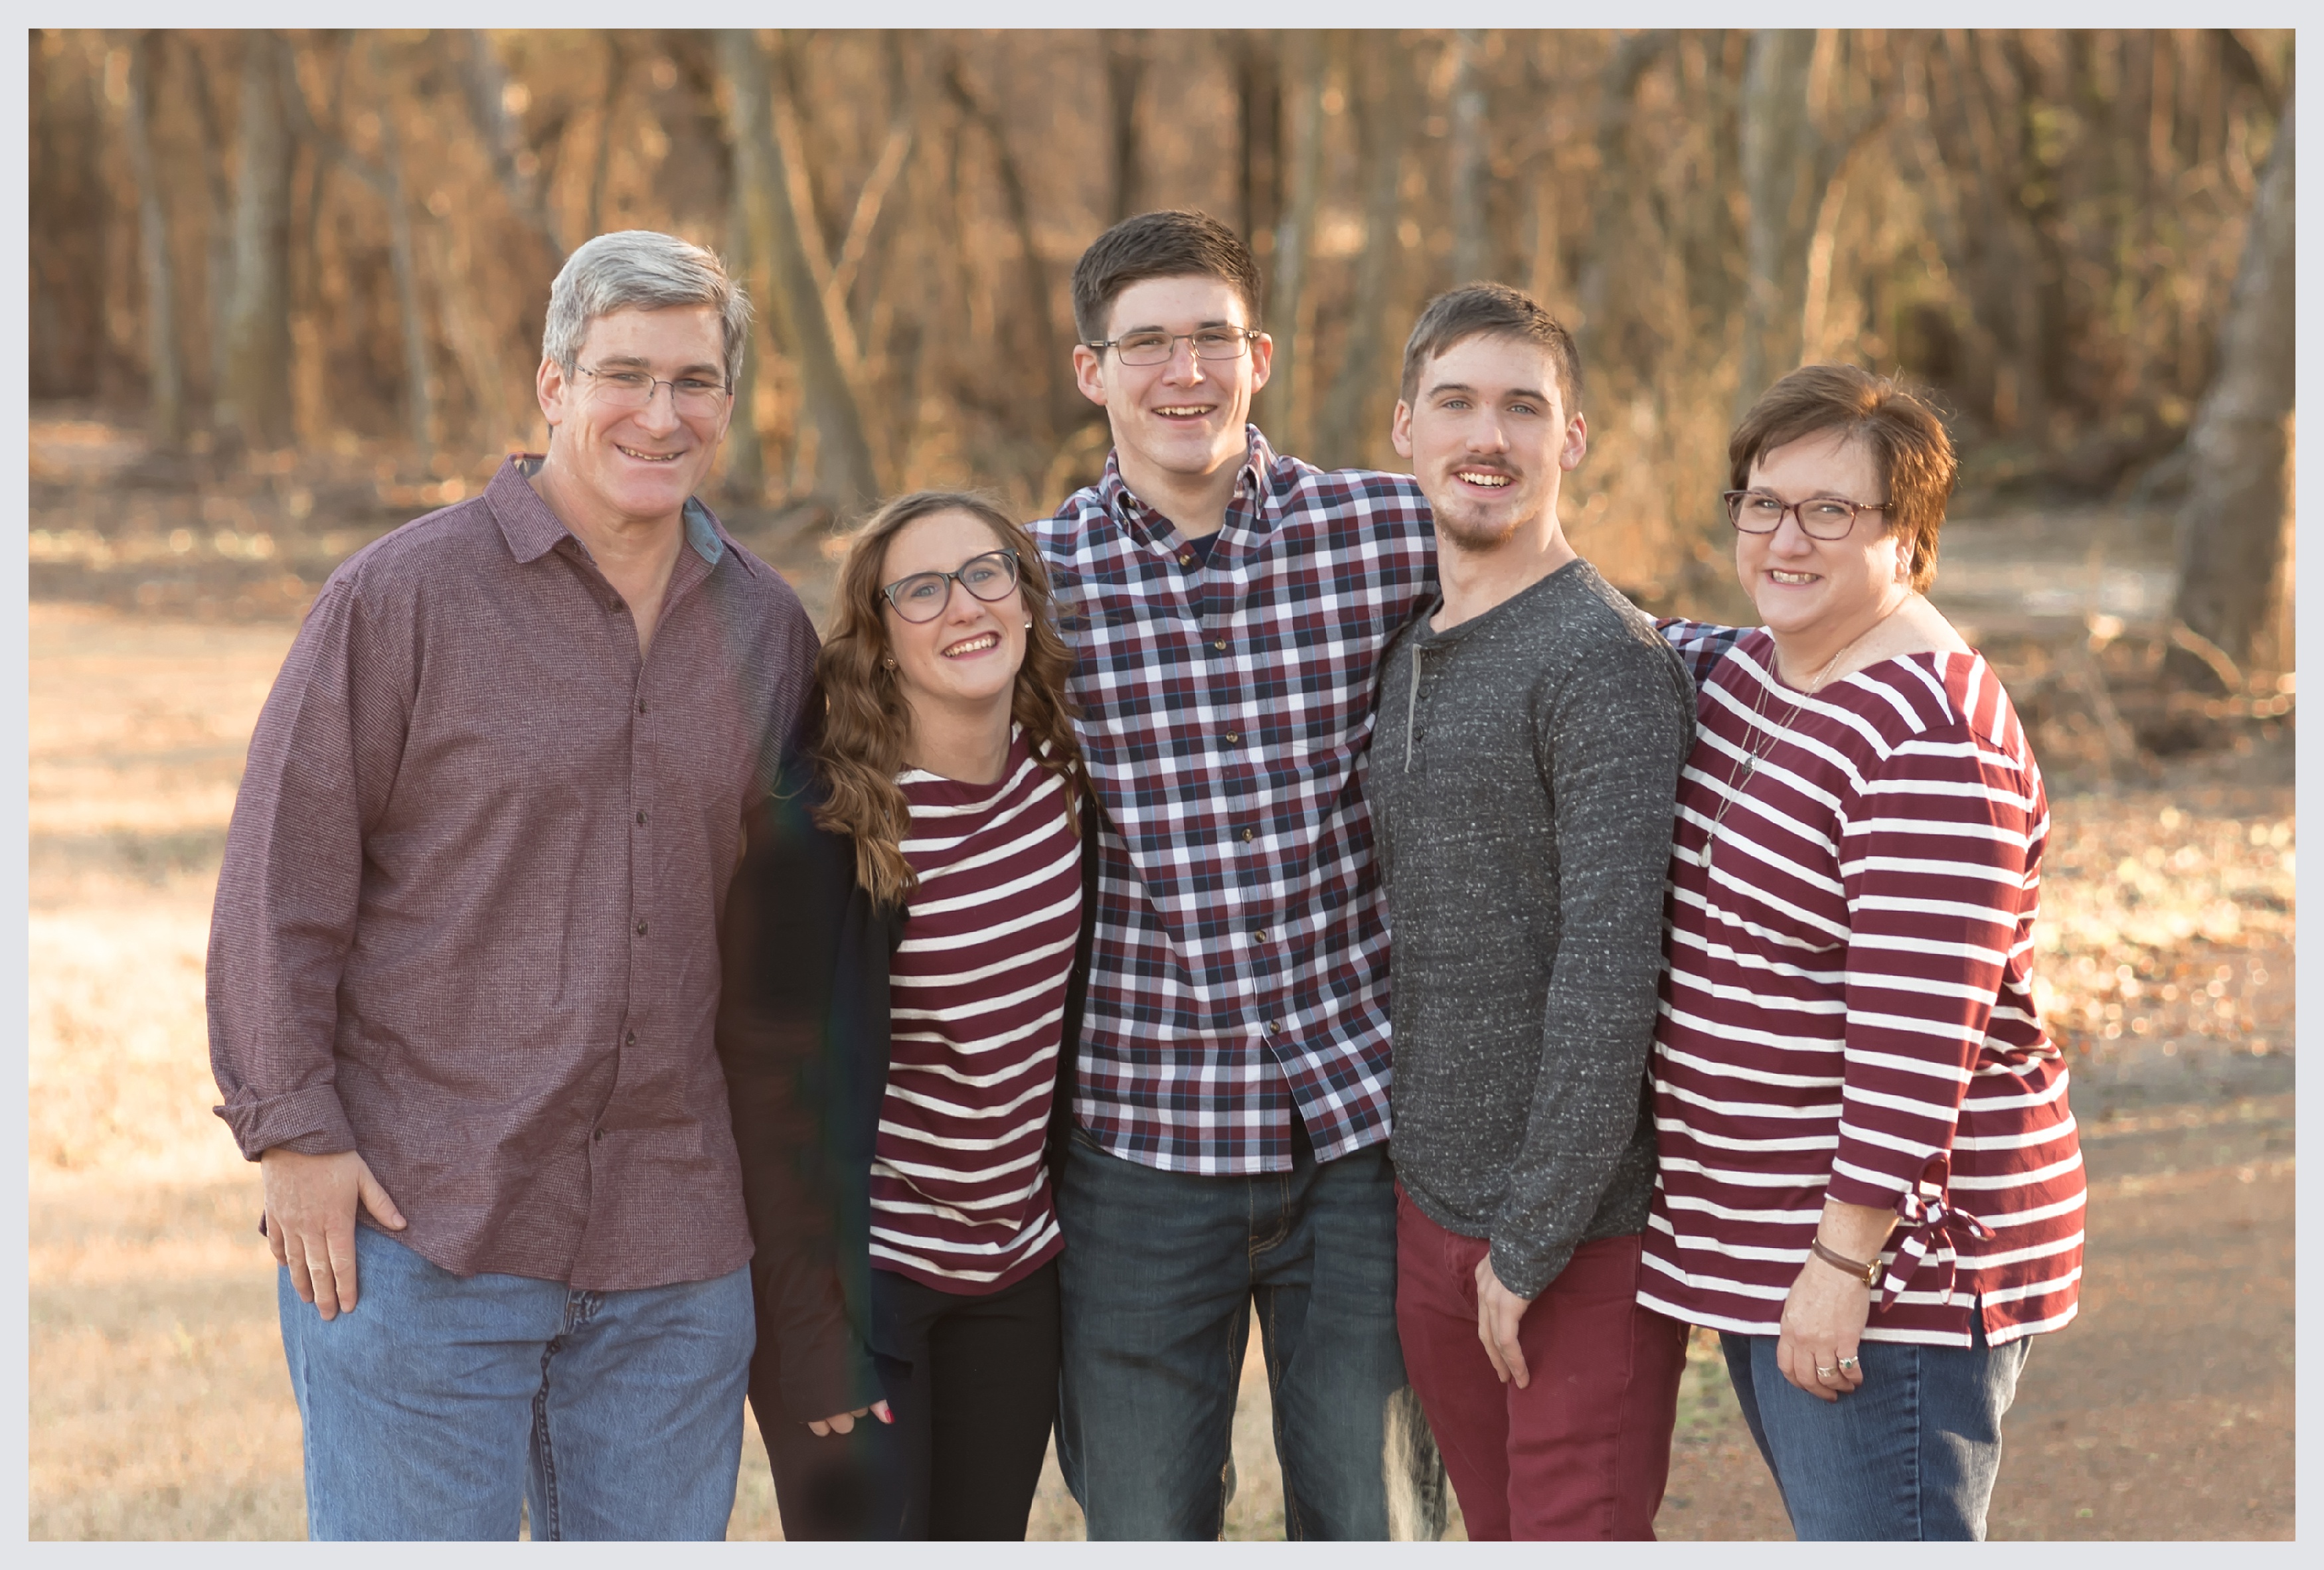 Sometimes you just meet people that you know you're going to click with right off the bat. That's how I felt as soon as I started to photograph the Causey family. I had THE MOST fun creating memories for this AWESOME family! 